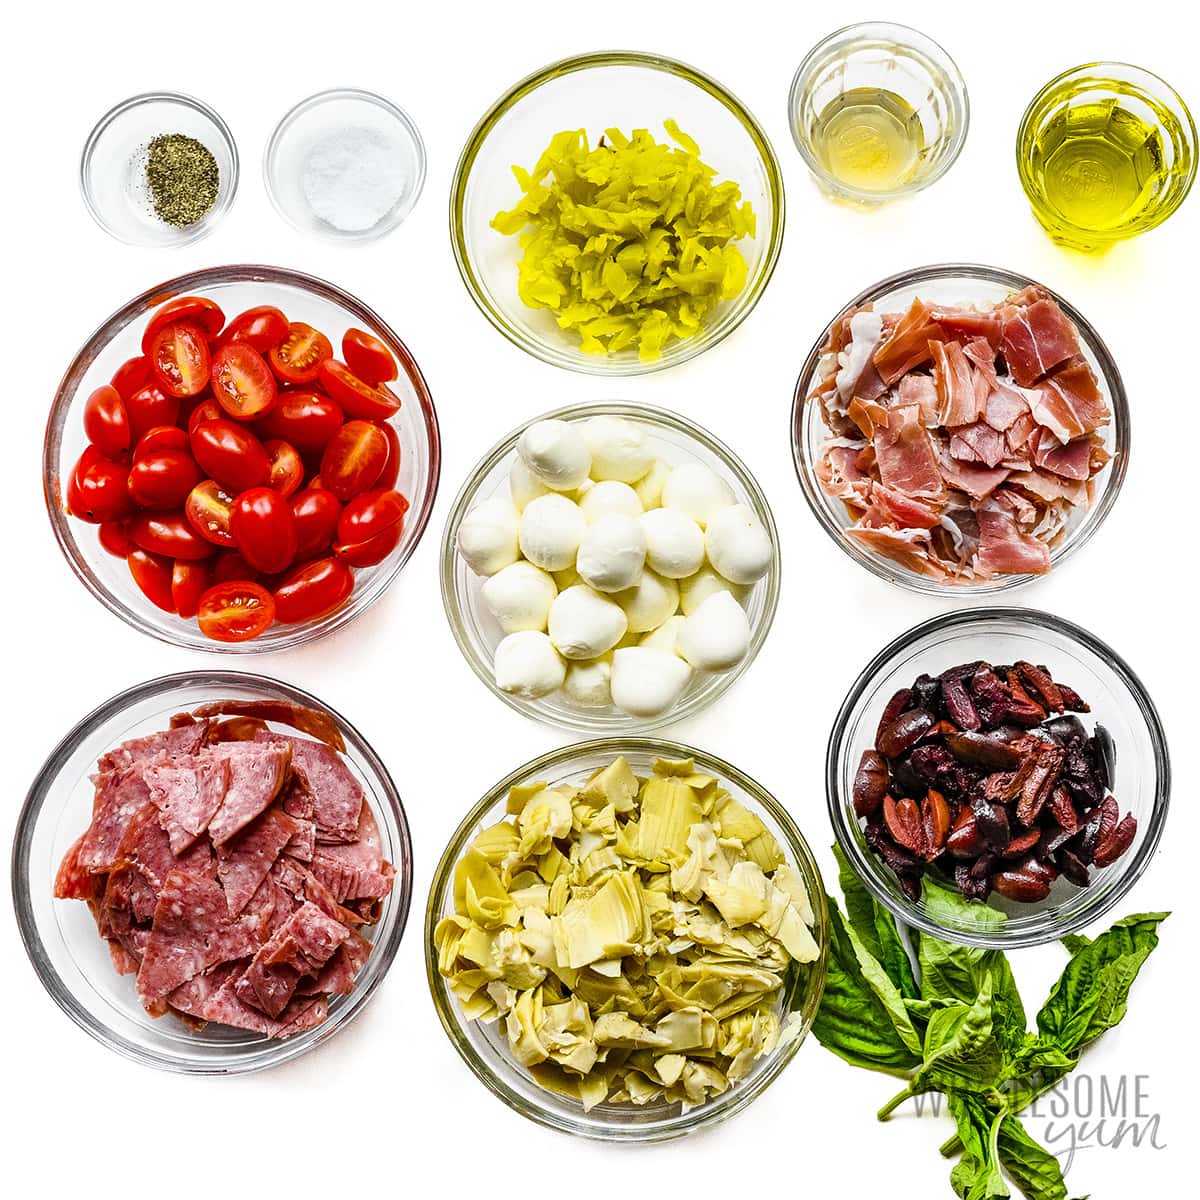 Antipasto salad recipe ingredients measured out in bowls.